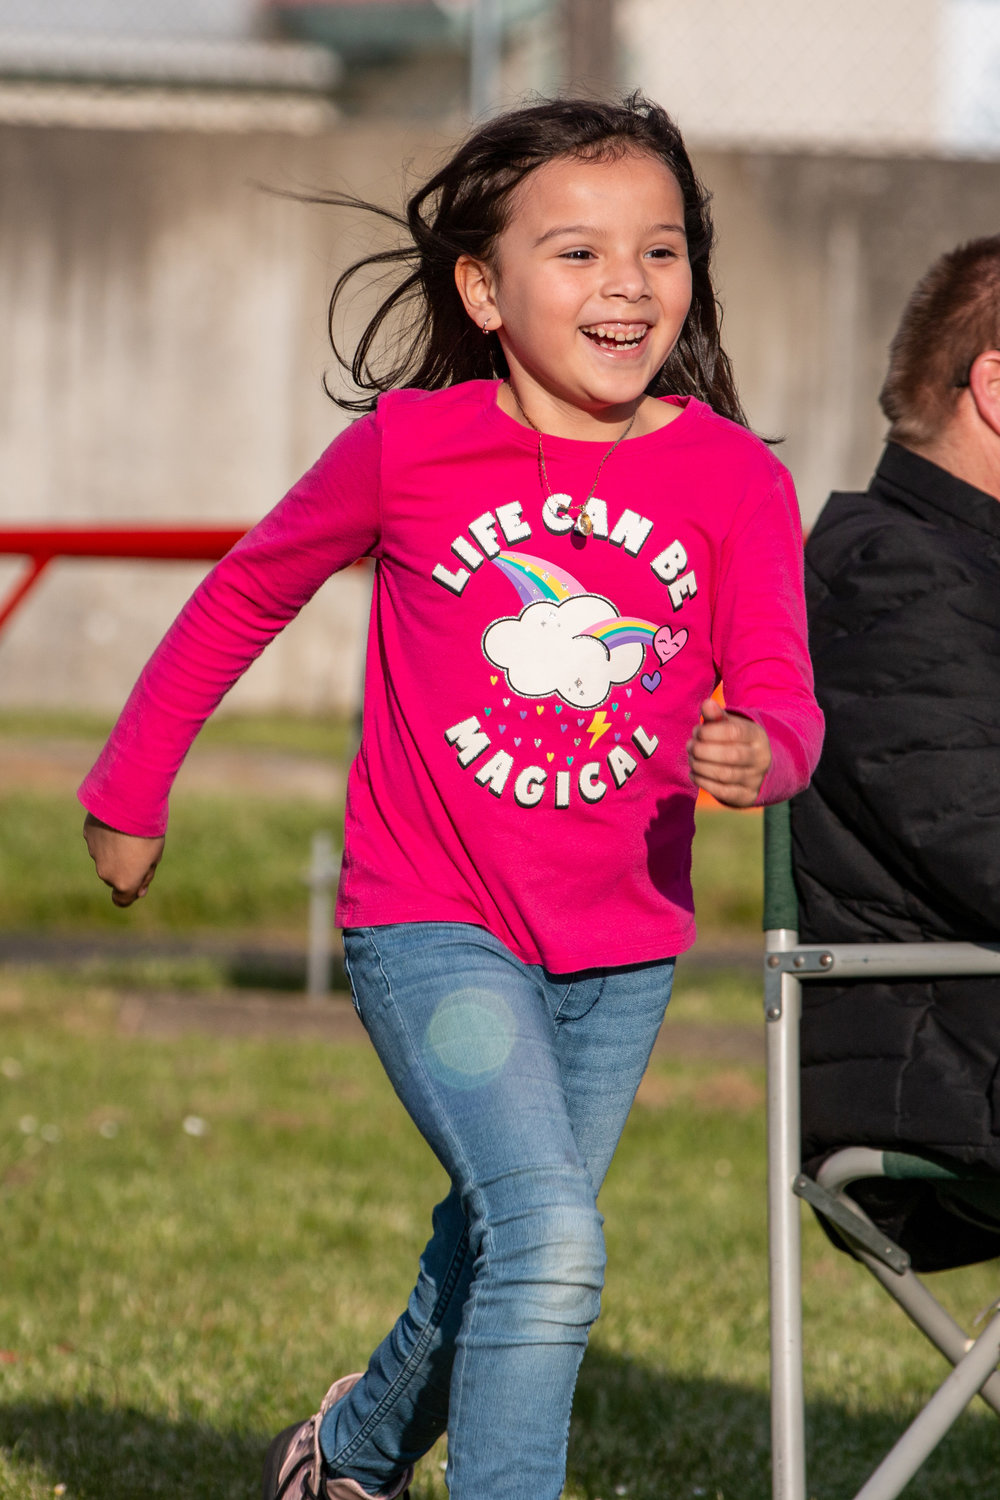 Siana Reyes, daughter of Briana and Paco Reyes, excitedly runs to claim her prize at Kelli’s Kid Kamp at the Relay for Life event held at the Southwest Washington Fairgrounds Friday evening.